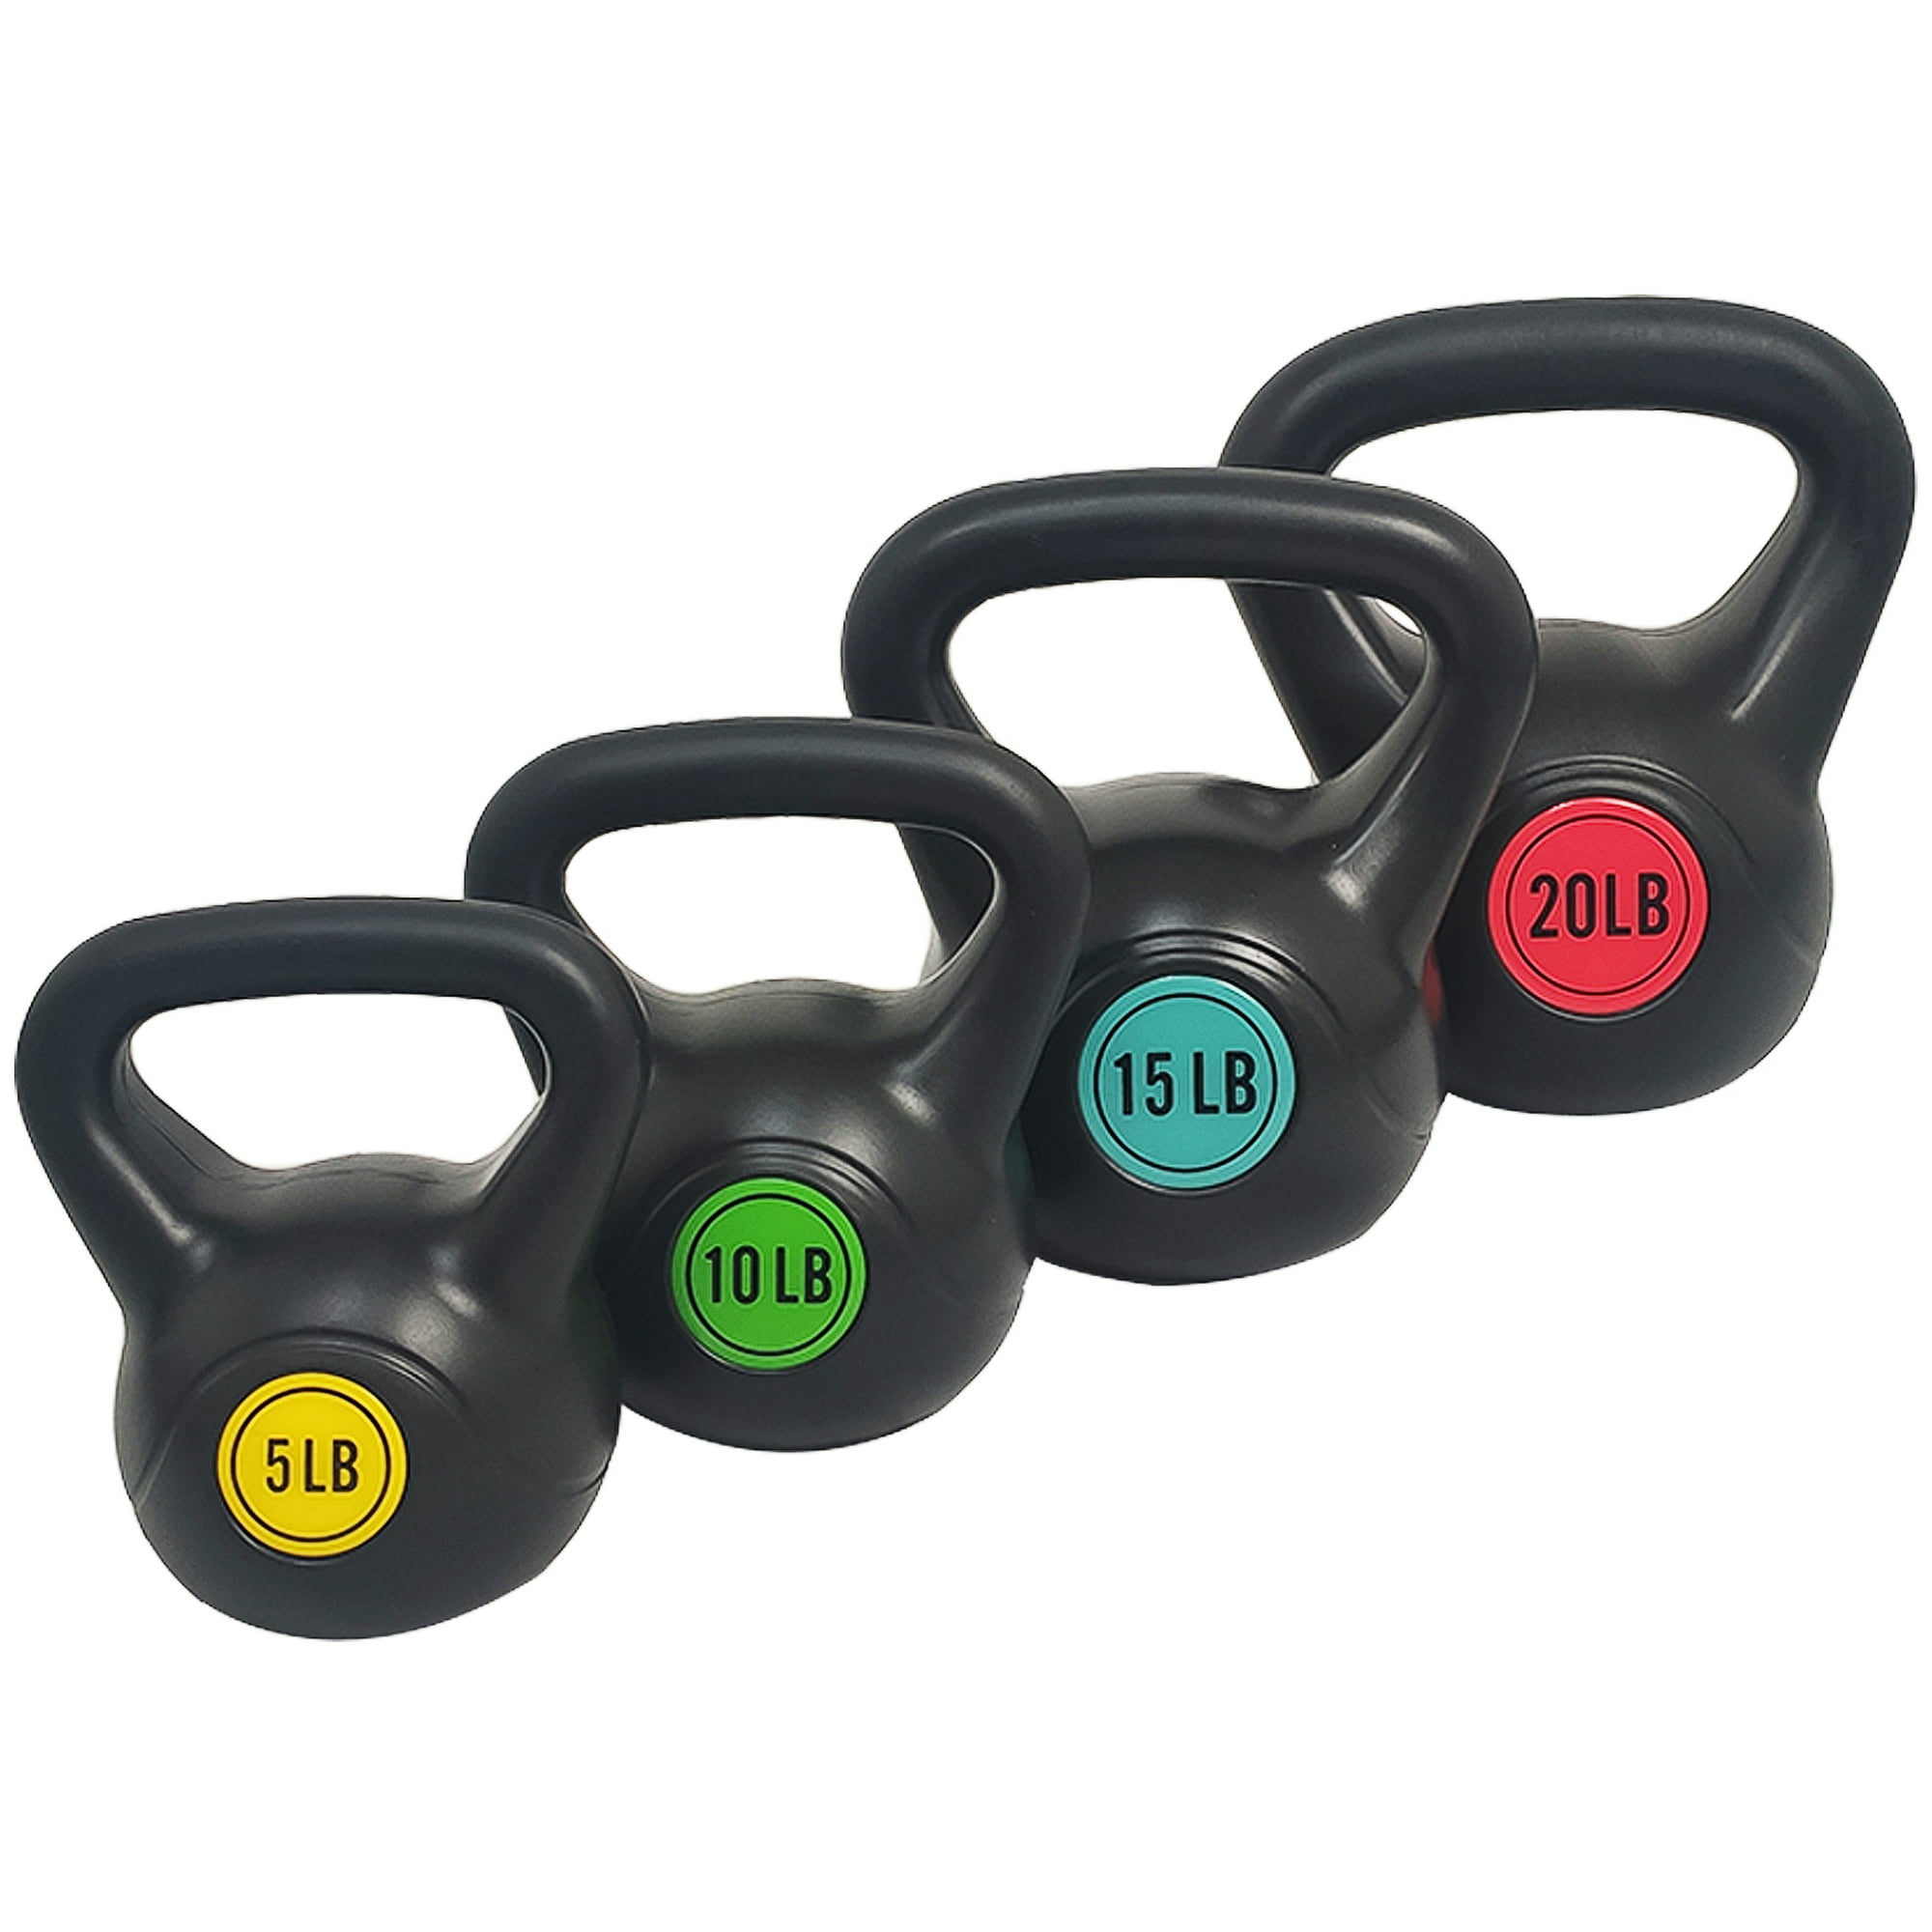 50-lbs BalanceFrom Wide Grip Kettlebell Exercise Fitness Weight Set $25.54 & More + Free Shipping with Walmart+ or on $35+